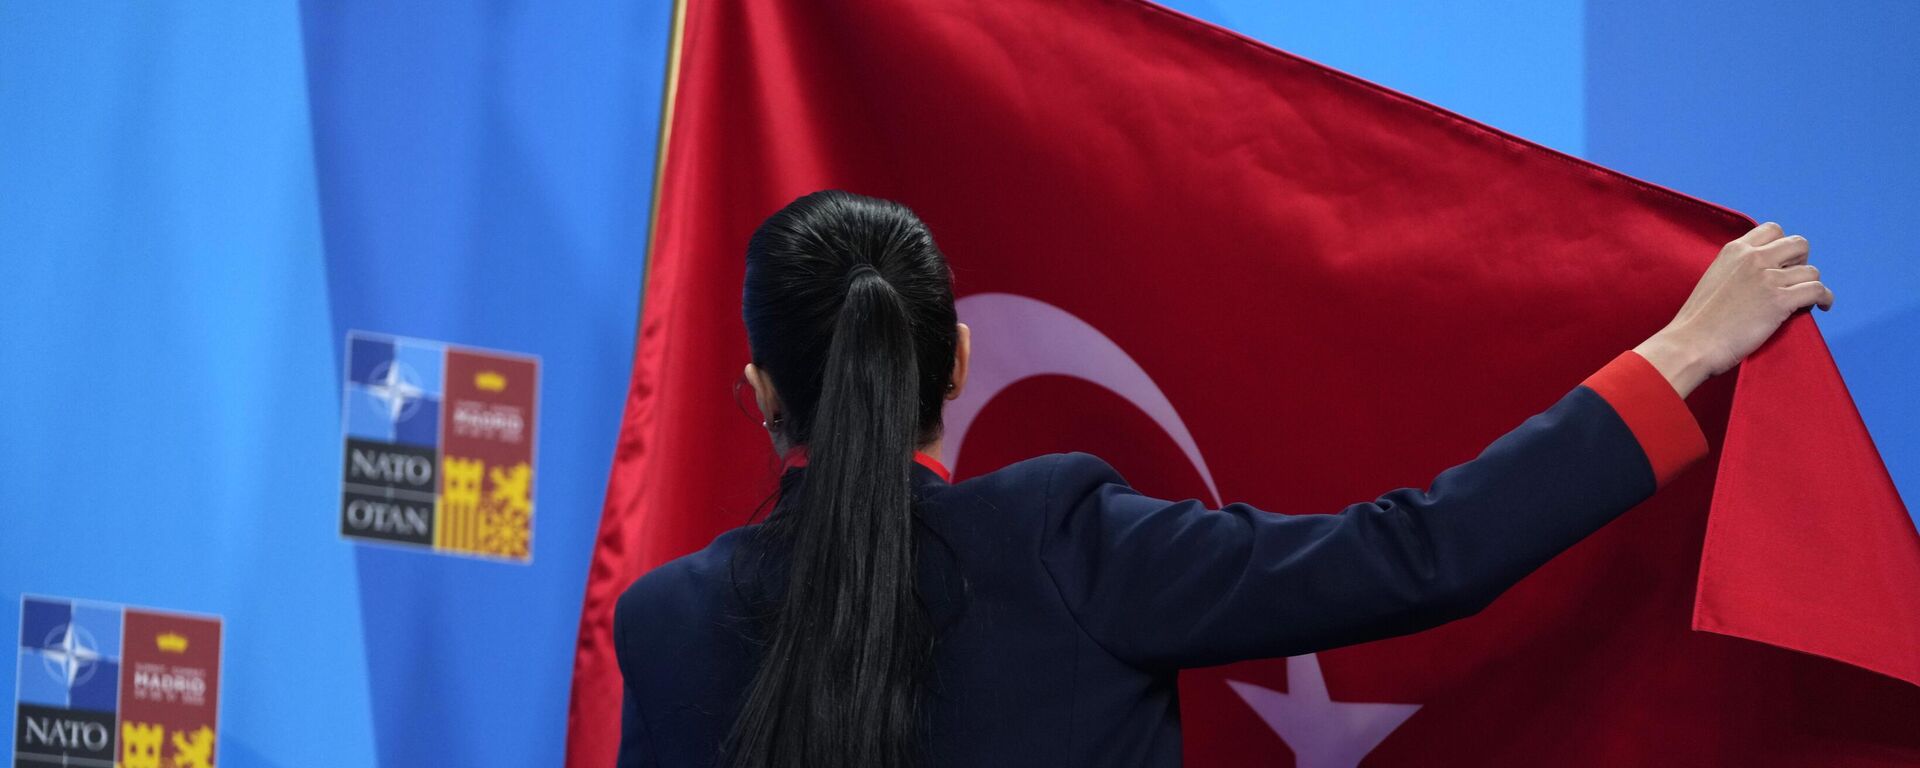 A member of the Turkish delegation adjusts the flag prior to an address by Turkish President Recep Tayyip Erdogan at a NATO summit in Madrid, Spain  - Sputnik International, 1920, 06.03.2023